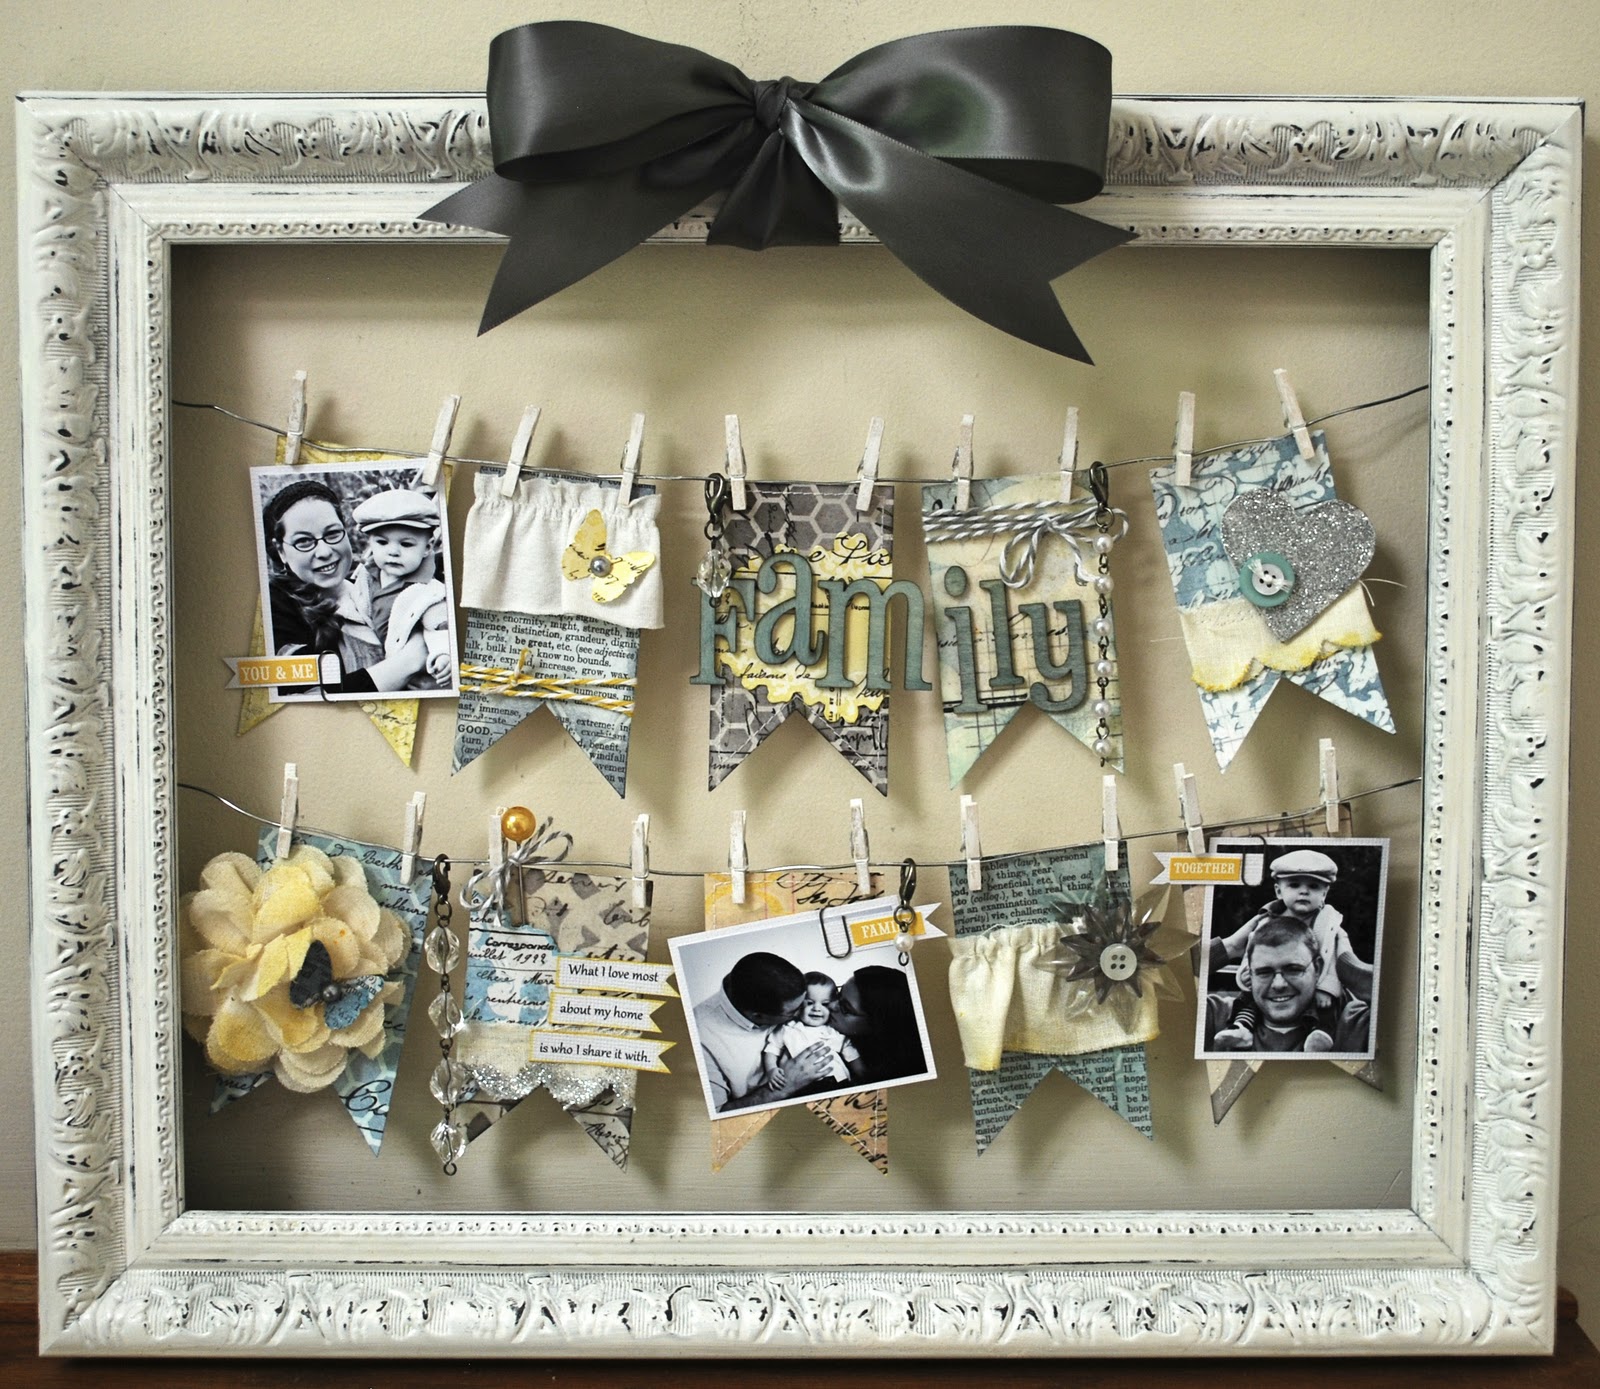 Creatice Cool Ways To Display Photos for Large Space